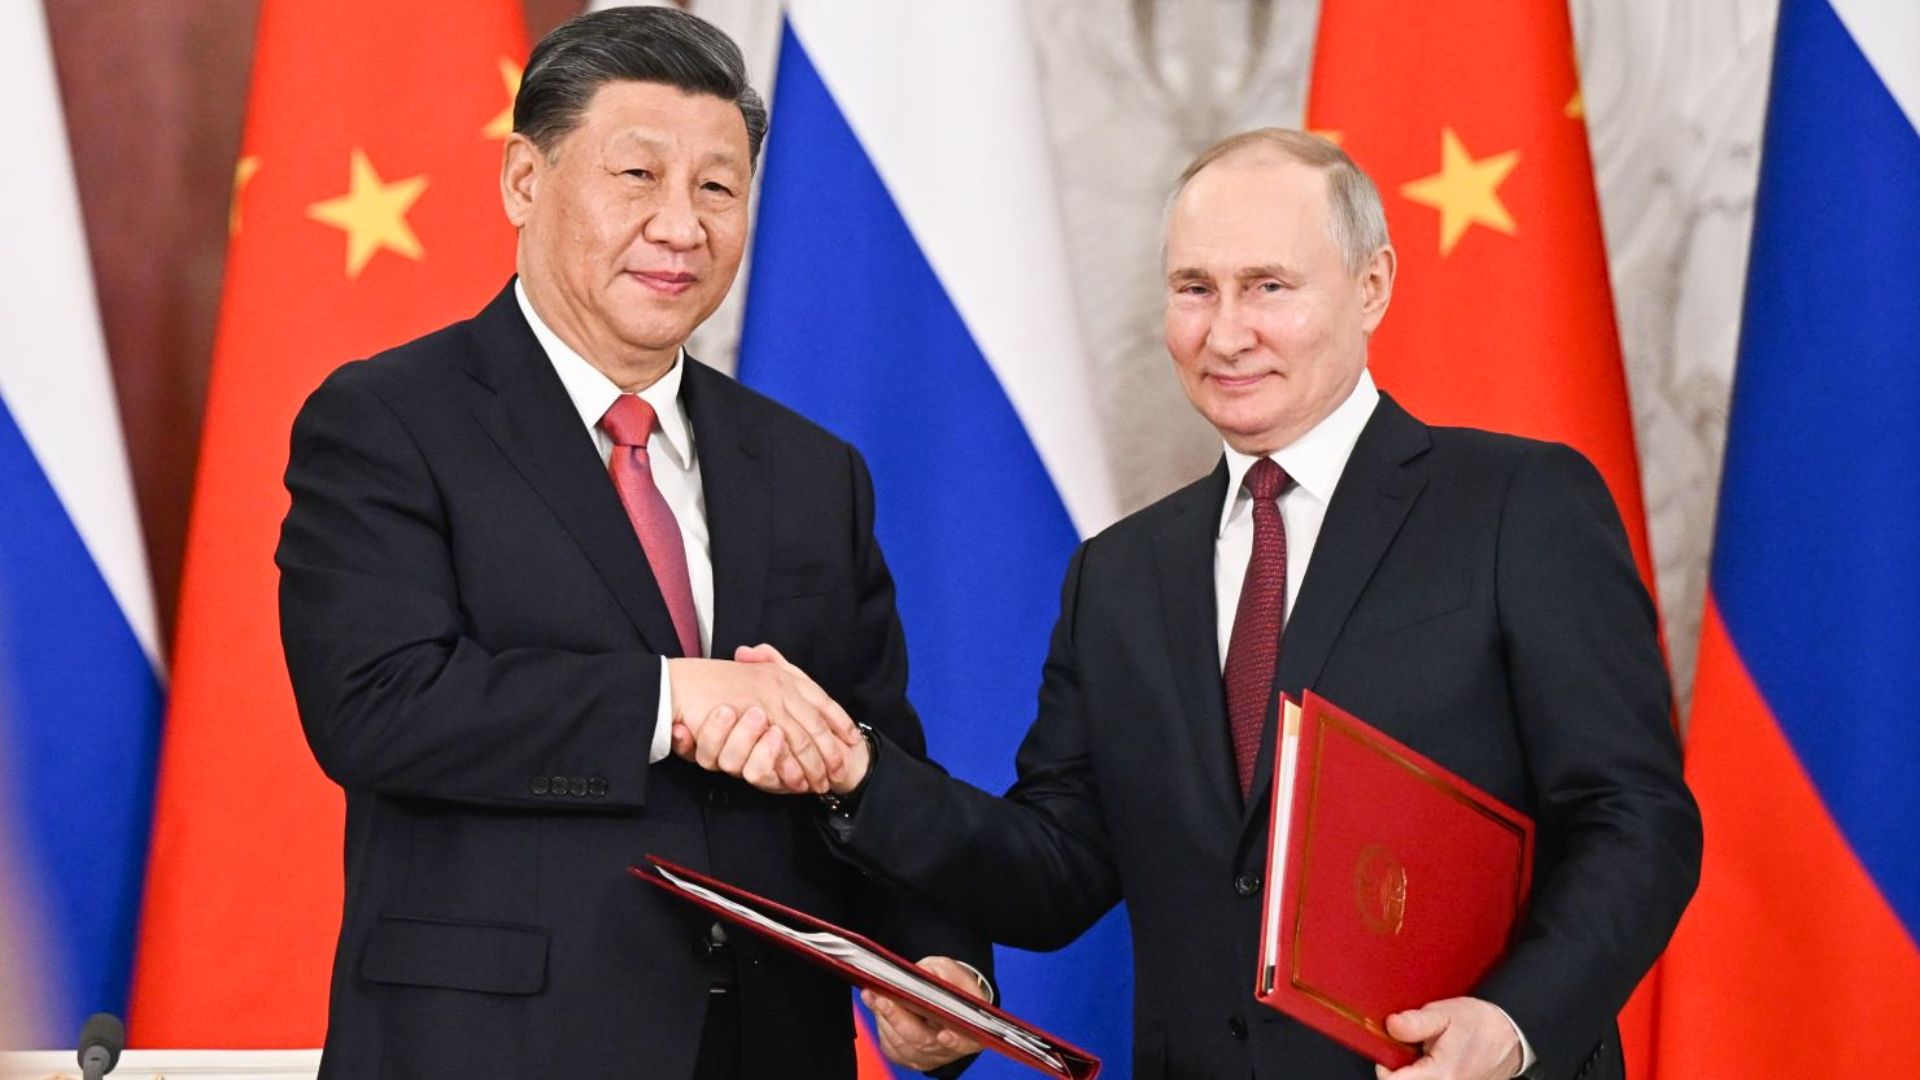 Xi Jinping and Putin Sign Joint Statement; China-Russia Partnership Marks 75th Anniversary of Diplomatic Ties Between Two Nations